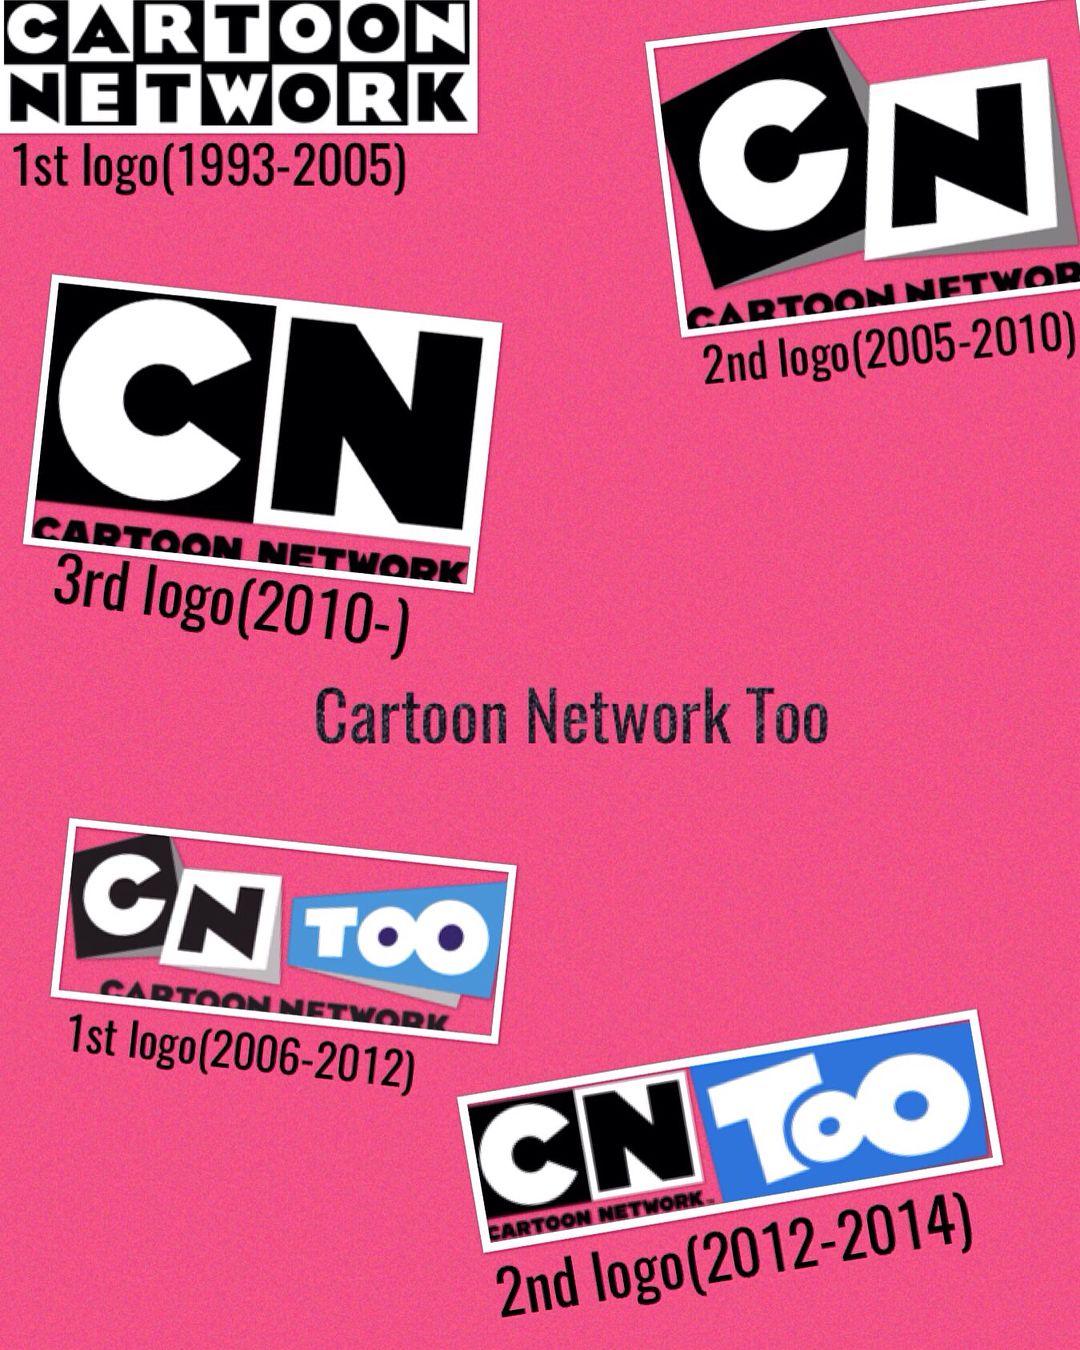 2006 Cartoon Network Too Logo - Images tagged with #ripcntoo on instagram